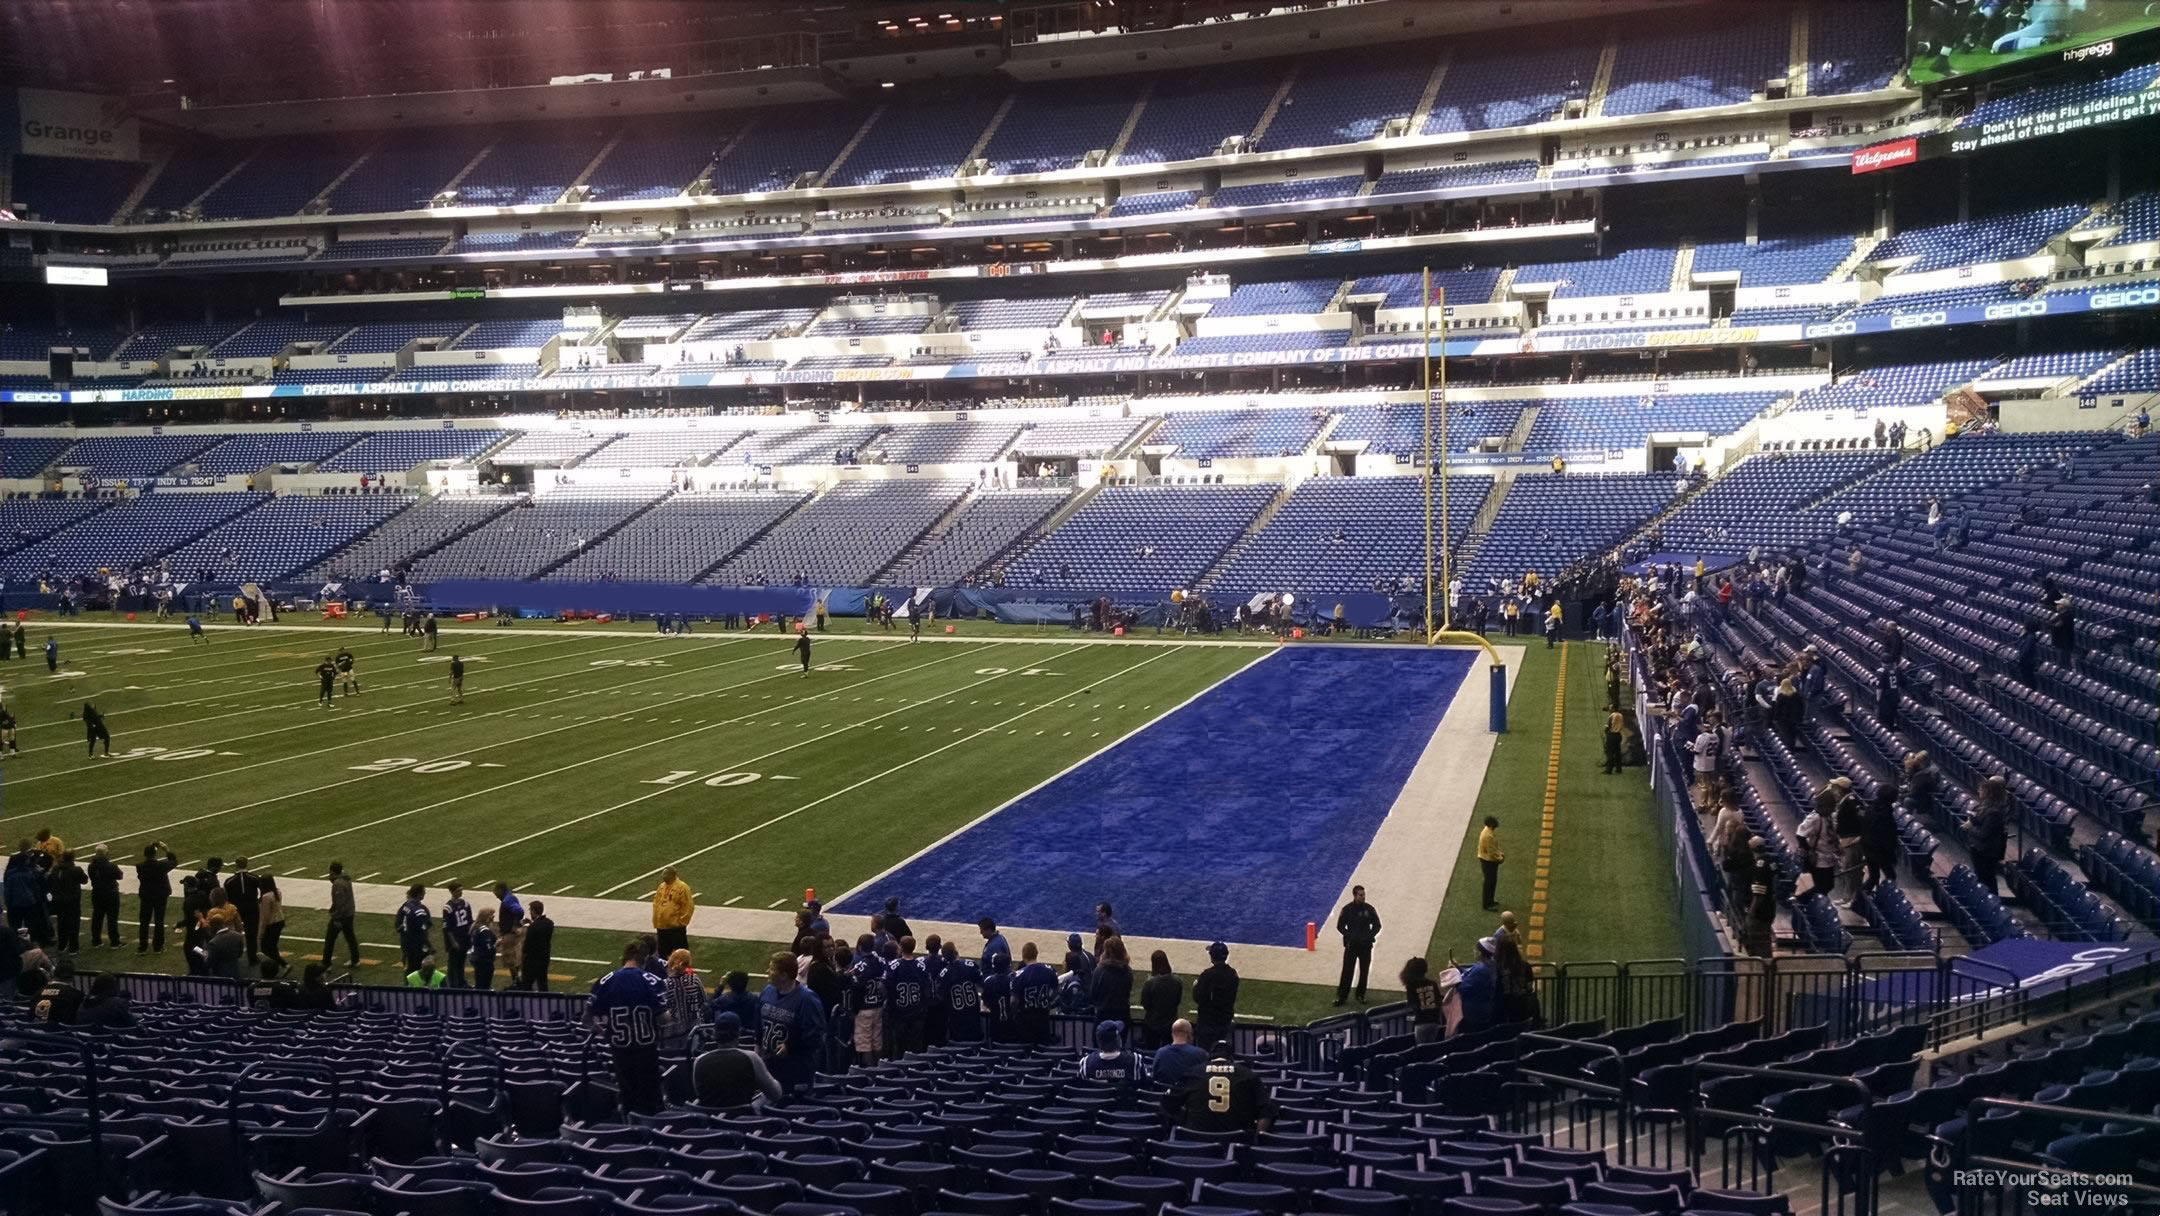 section 108, row 22 seat view  for football - lucas oil stadium